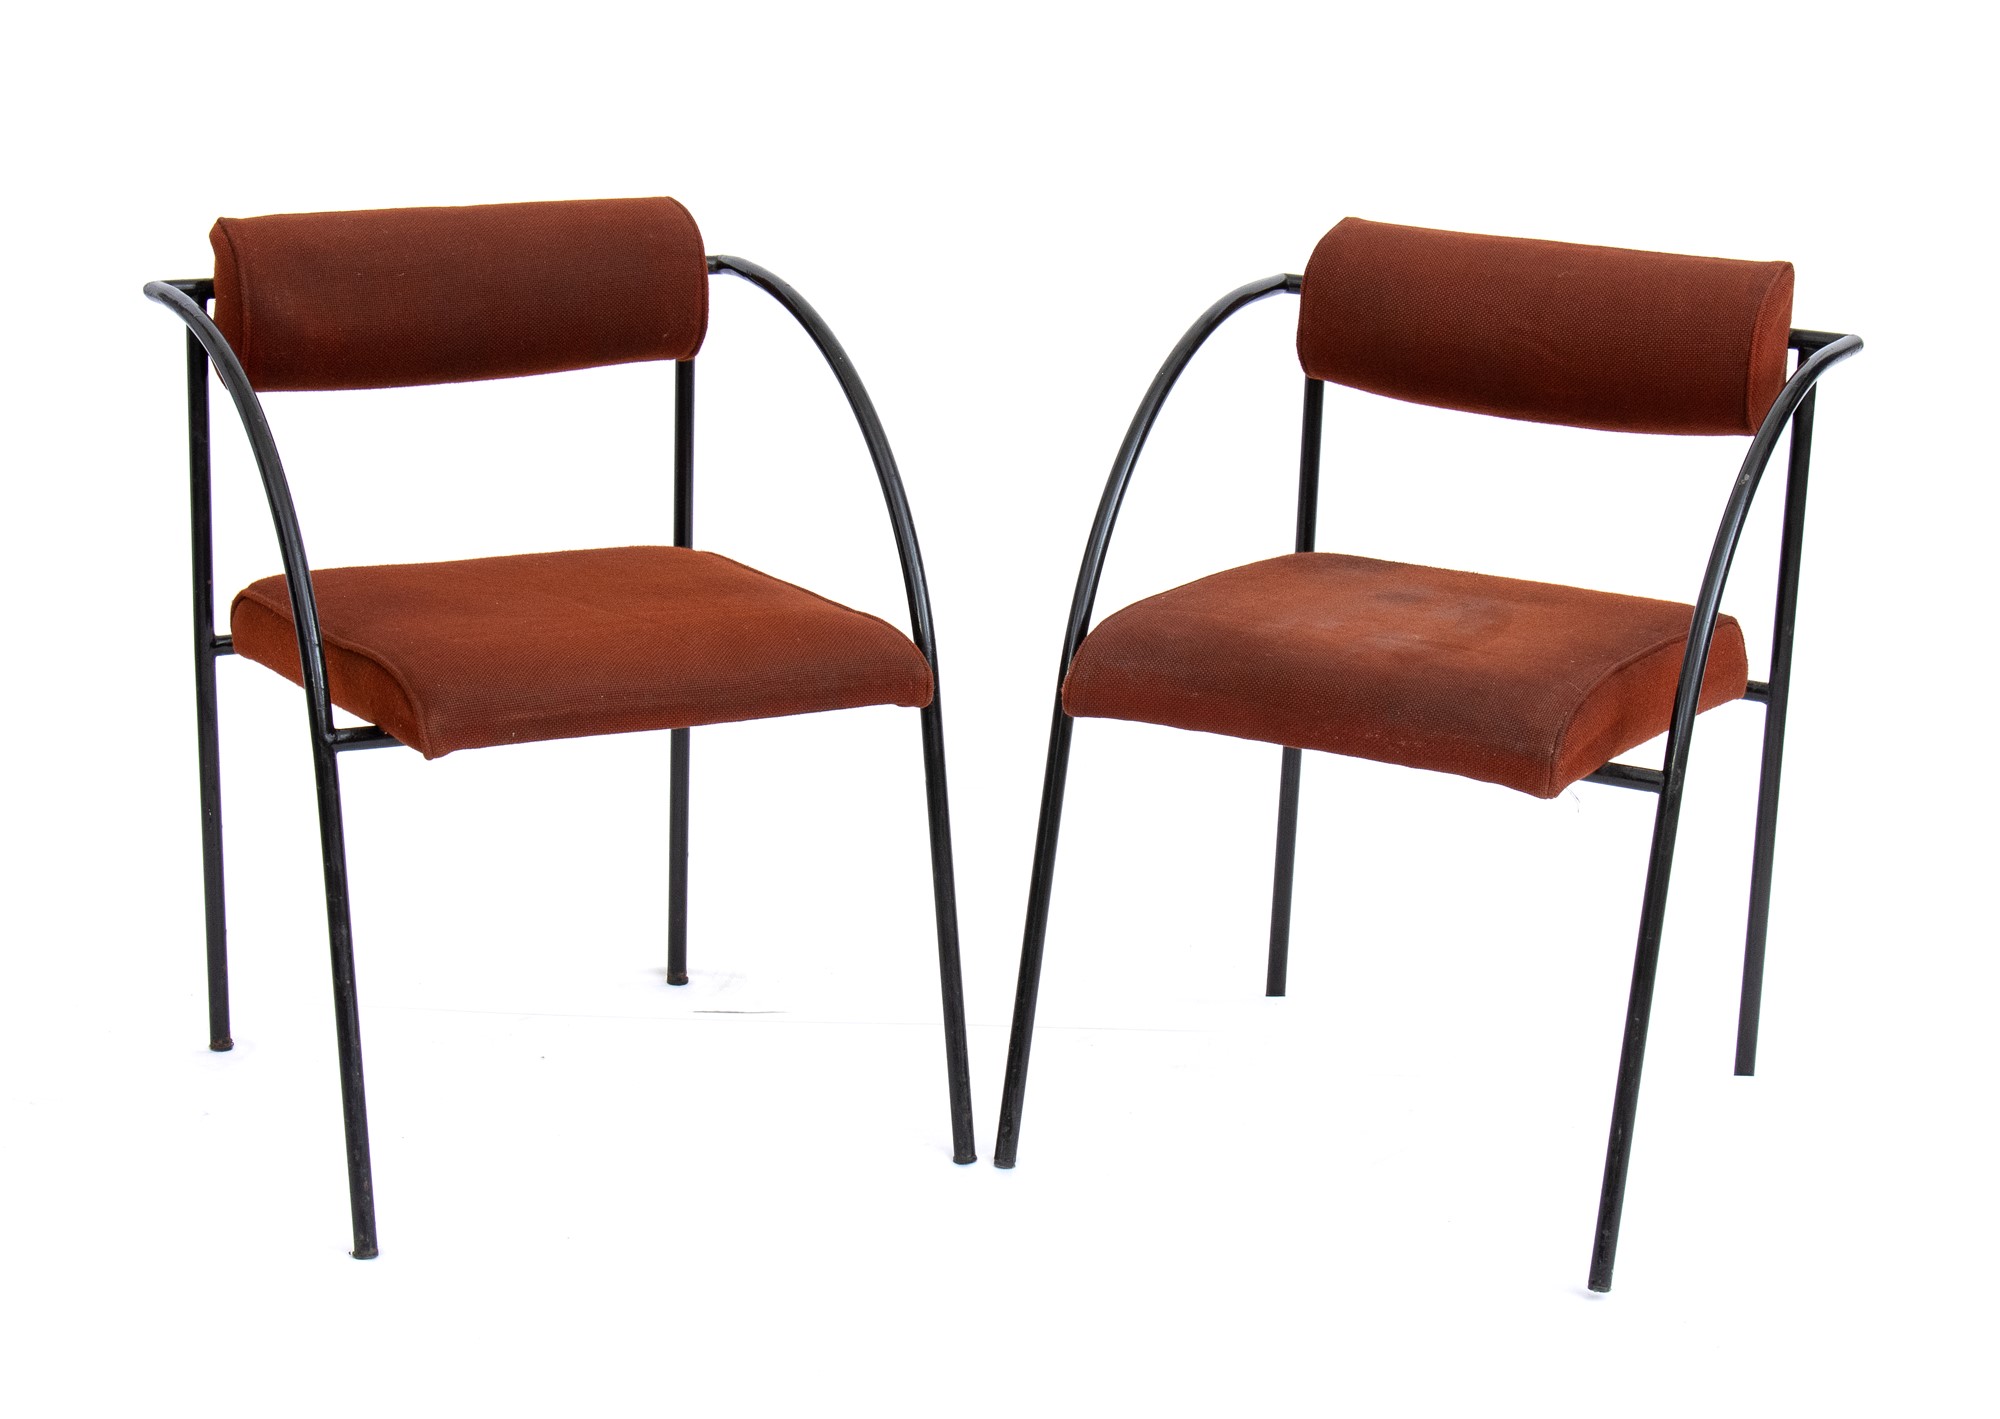 Rodney Kinsman Londra 1943 Set of two Wien chairs with round metal structure and curved armrests - Image 3 of 15